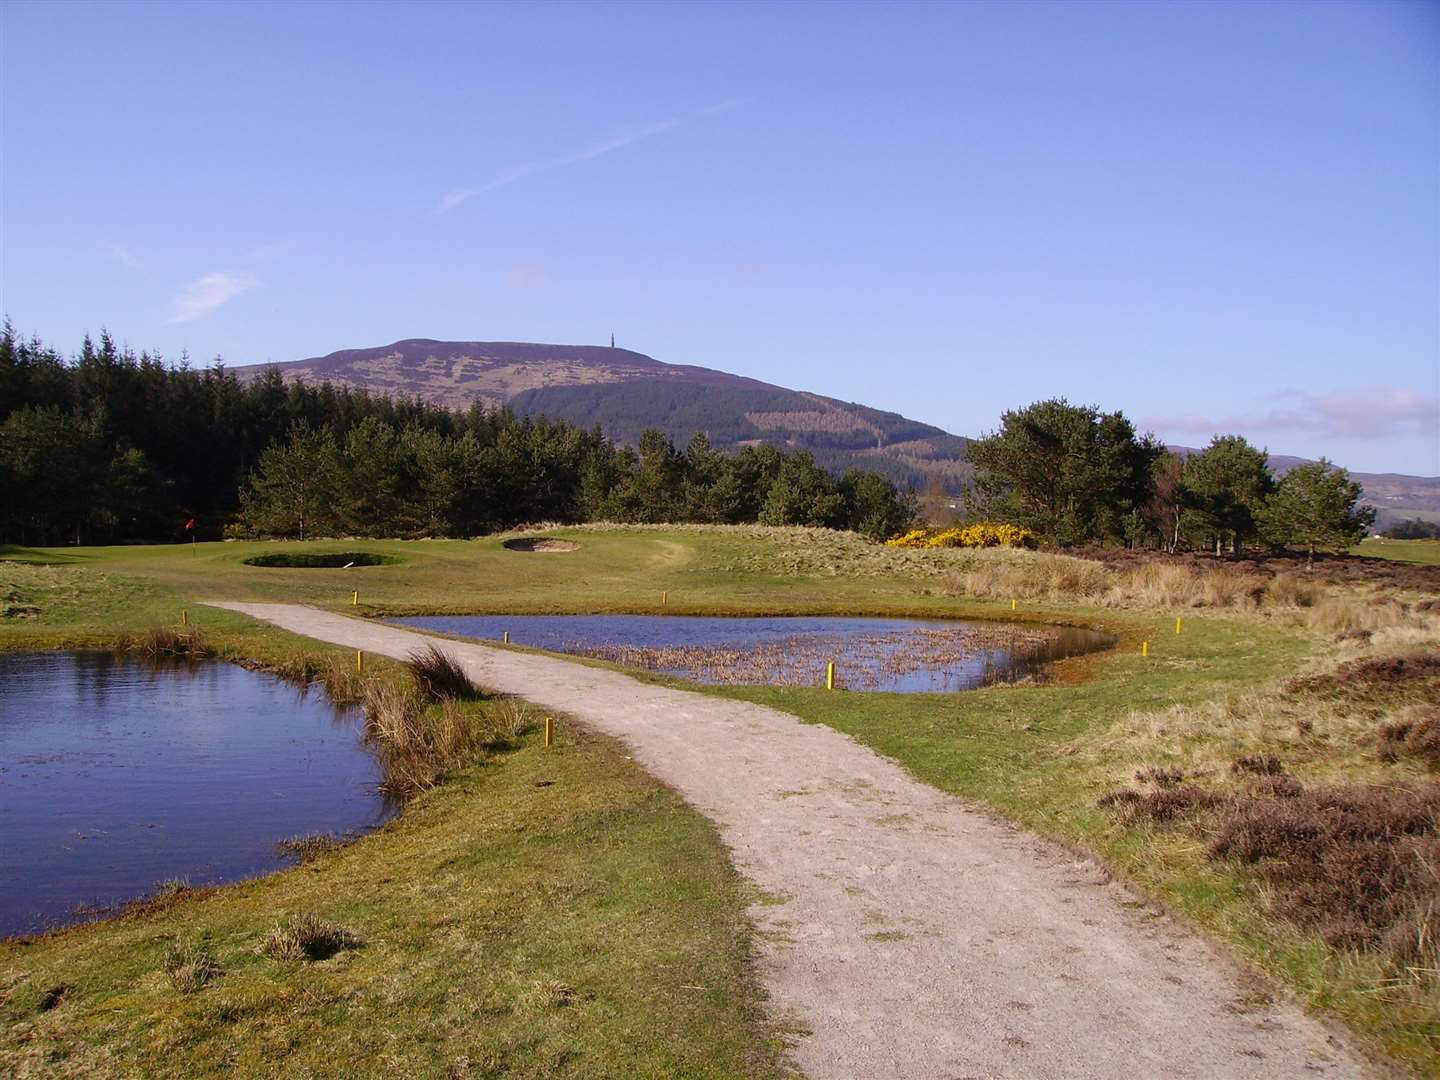 In total, over 3500 tonnes of debris was cleared from Golspie golf course.